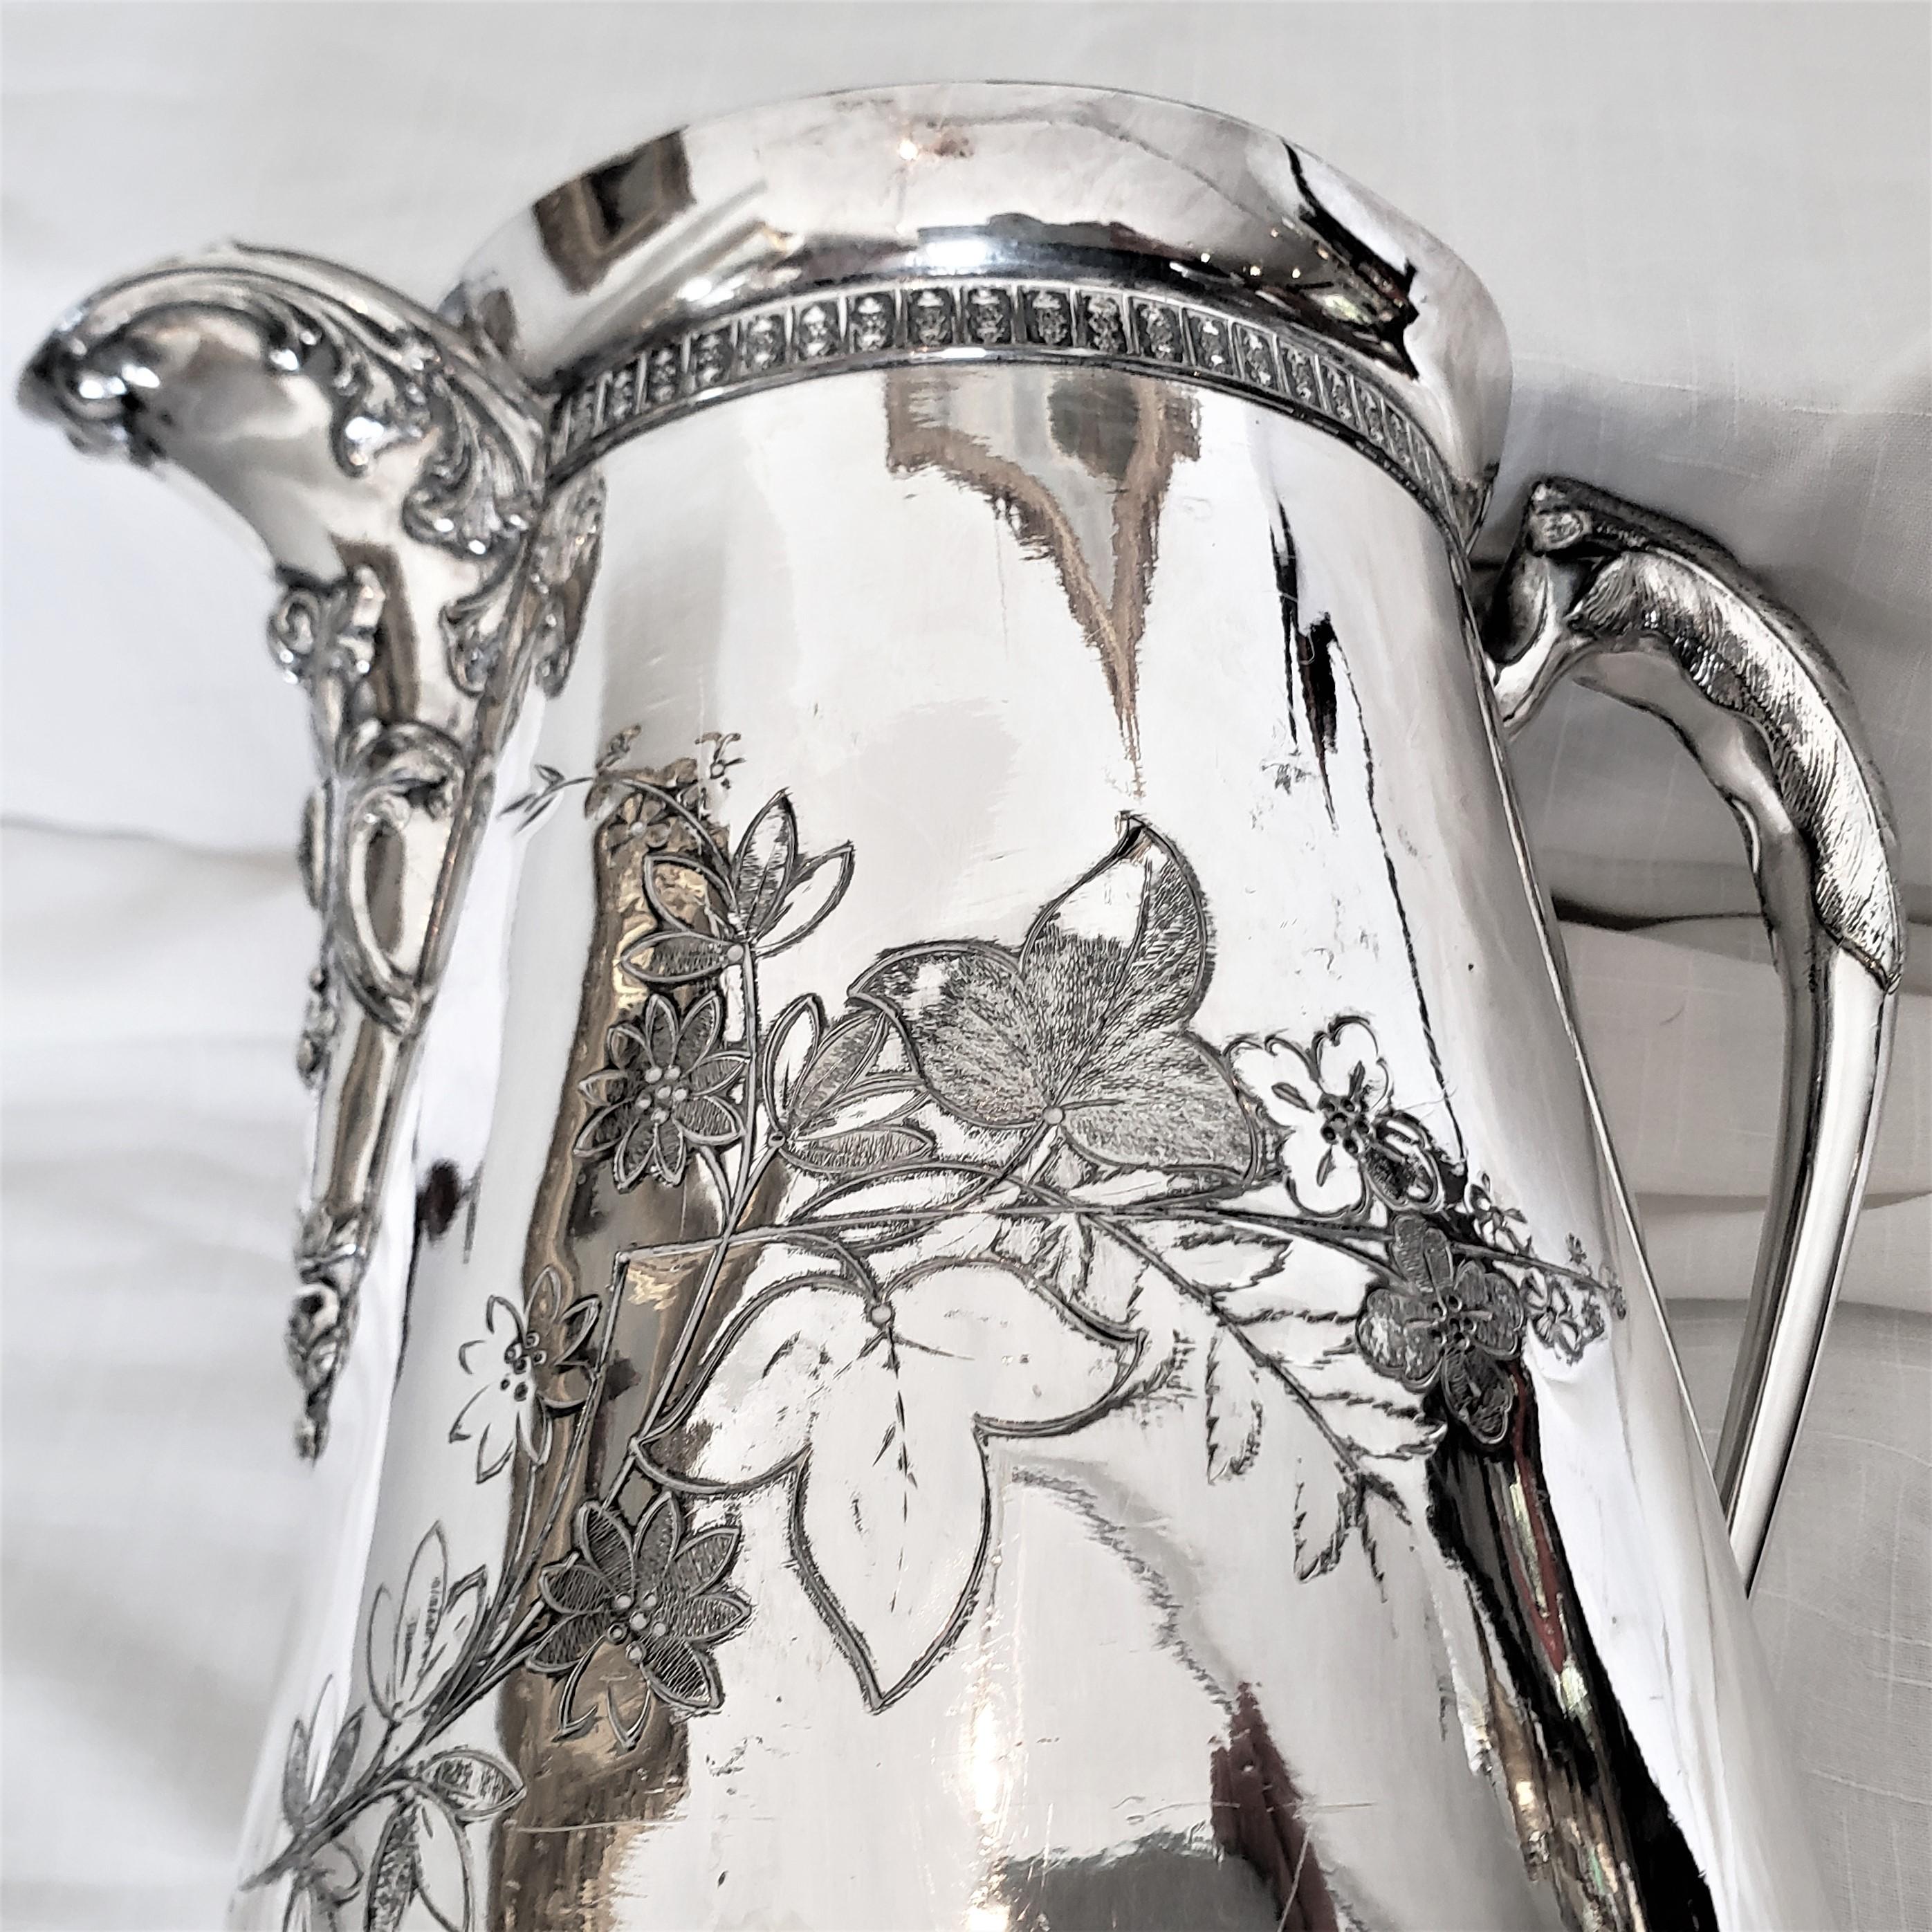 Antique Silver Plated Insulated Hot Water Pitcher with Leaf Decoration For Sale 3